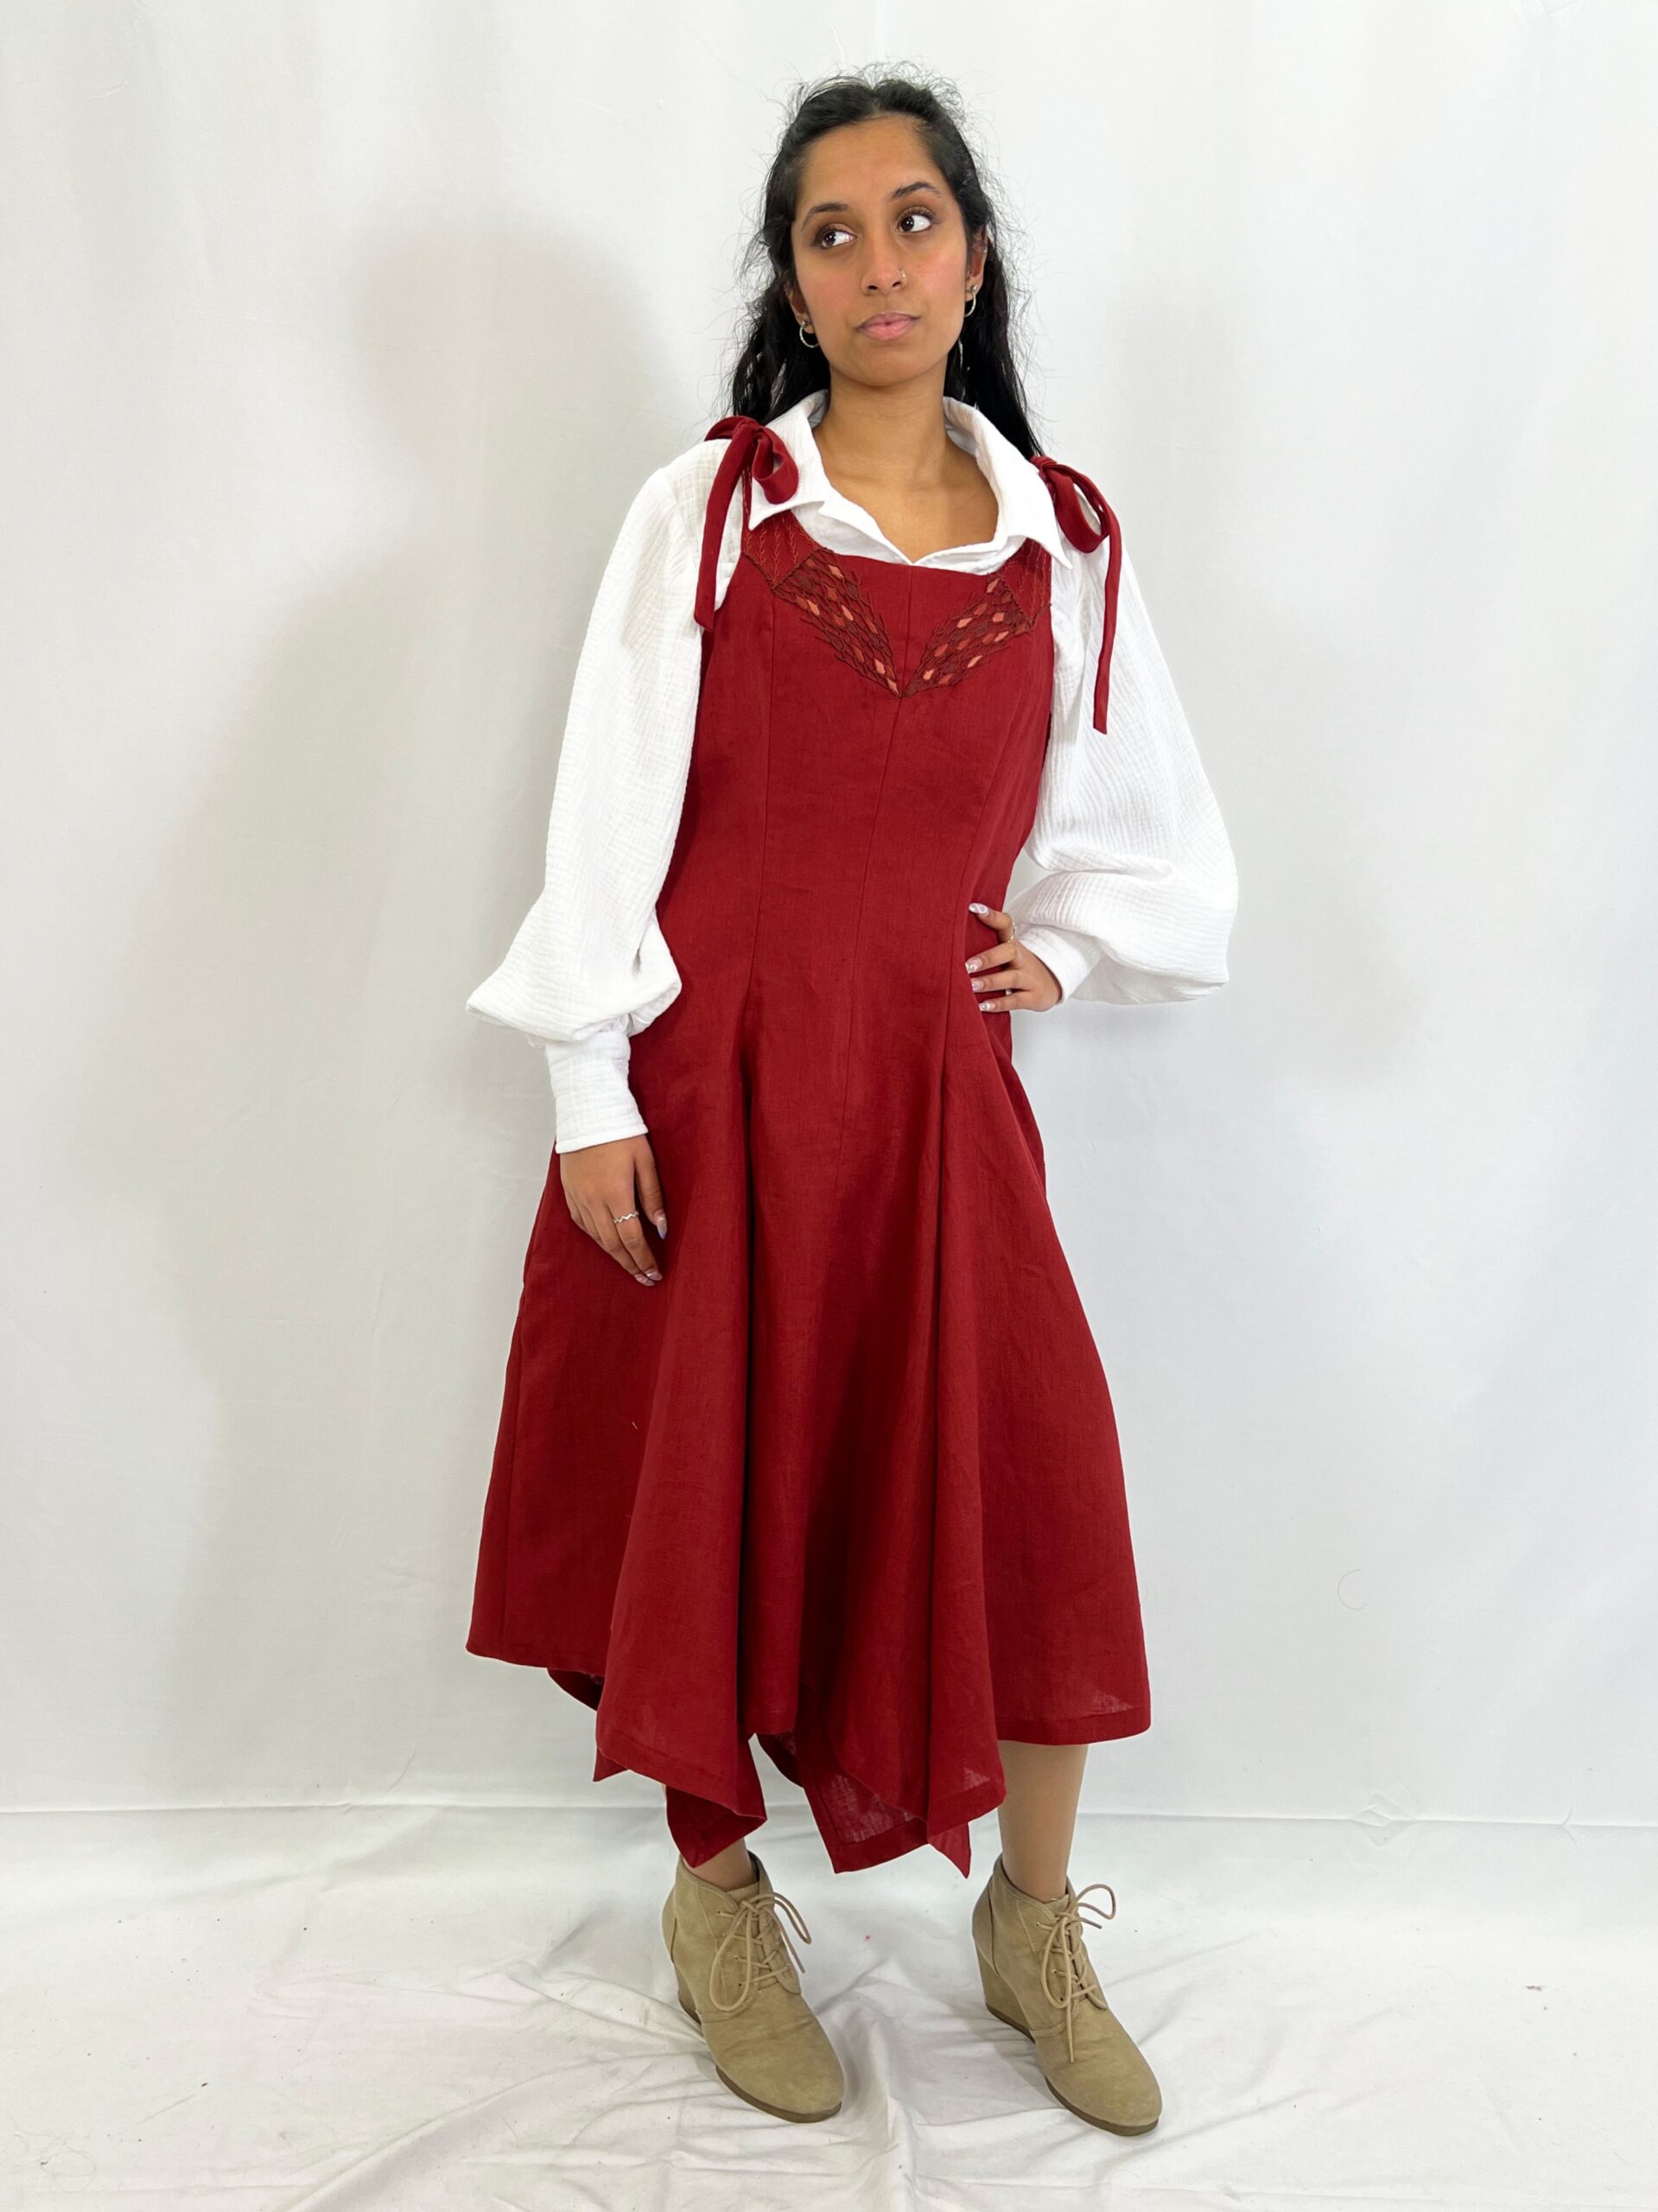 The Éléonore look features a cotton blouse with bishop sleeves and wide cuffs, and a linen dress with a handkerchief hem, princess seams, and hand-sewn embroidery at center front. Modelled by Alana Naraine.